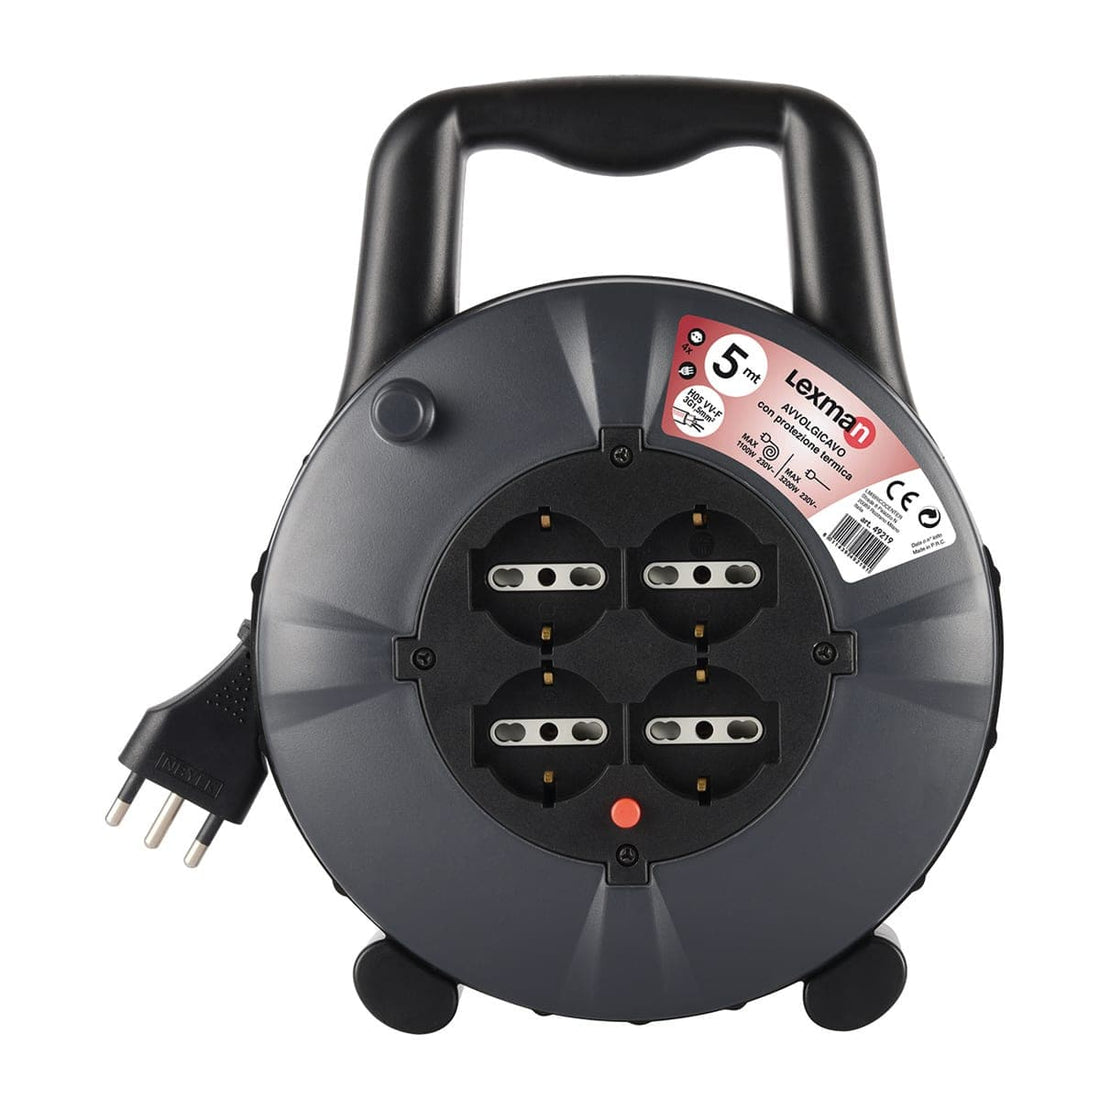 CABLE REEL 5MT PLUG 16A 4 UNIVERSAL SOCKETS WITH THERMAL CIRCUIT BREAKER - best price from Maltashopper.com BR420003062